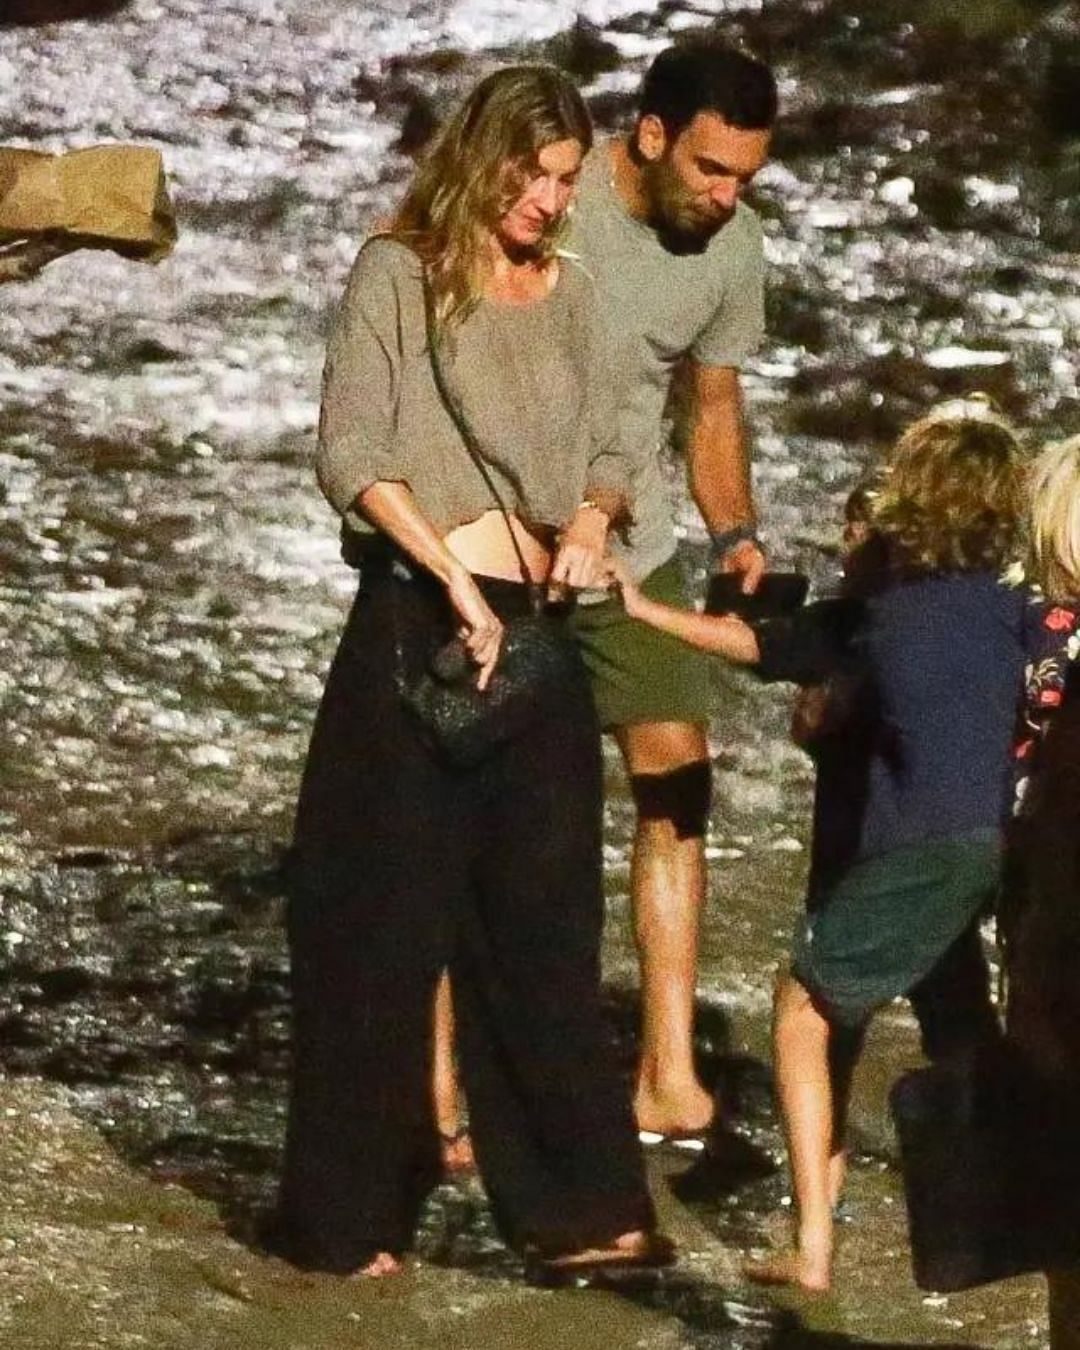 B&uuml;ndchen with Valente and her &amp; Brady&#039;s children in Costa Rica. Source: Page Six